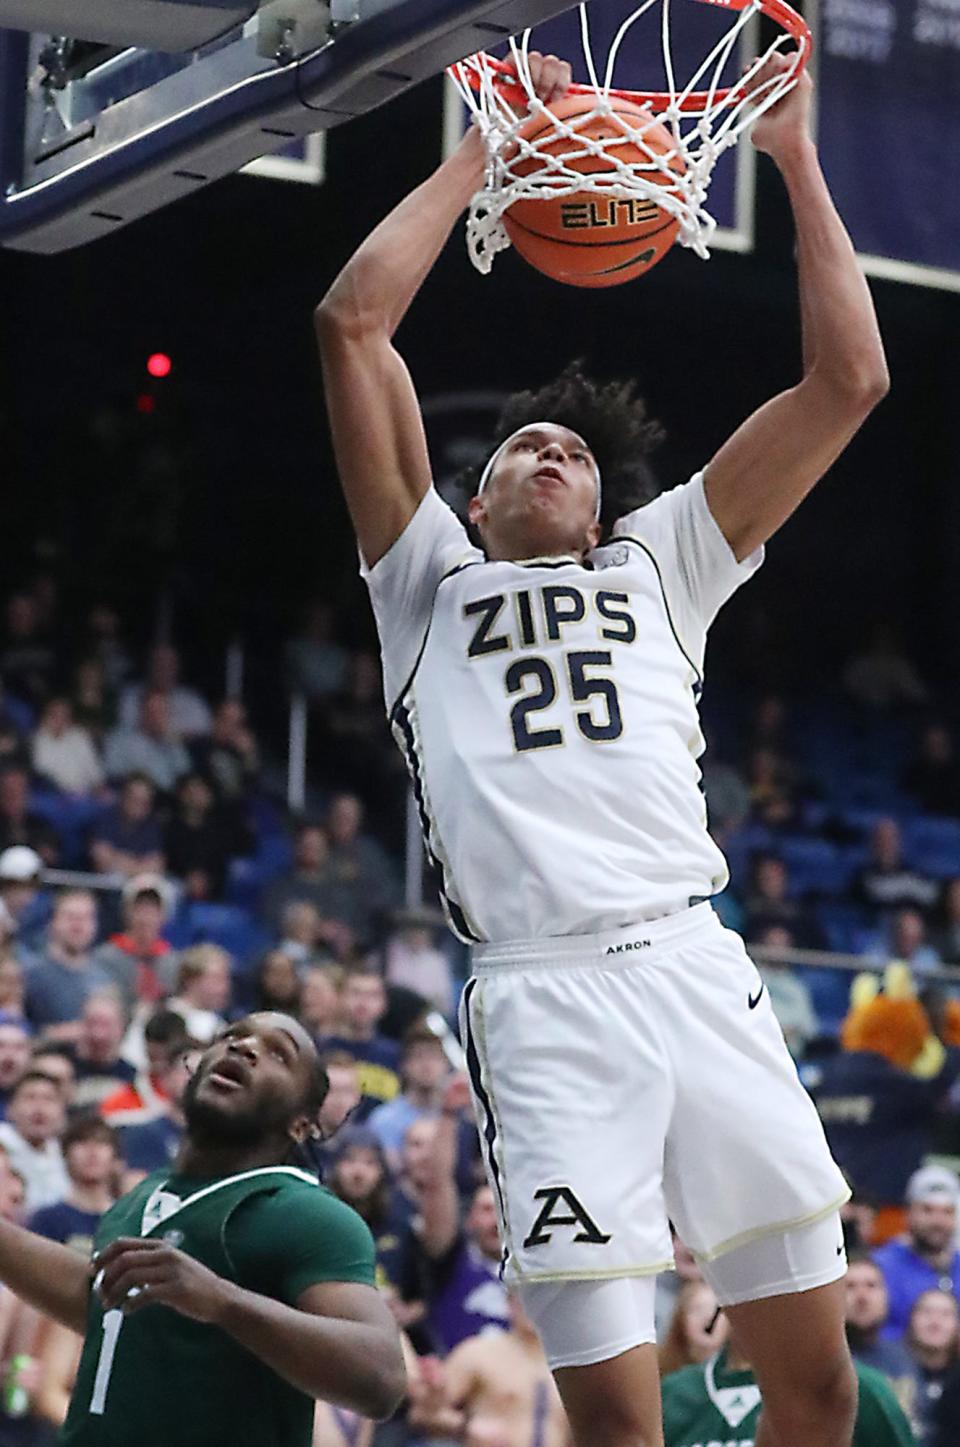 Akron's Enrique Freeman dunks against Eastern Michigan University during their MAC game at the University of Akron's James A. Rhodes Arena on Friday. The Zips beat the Eagles 104 to 67.